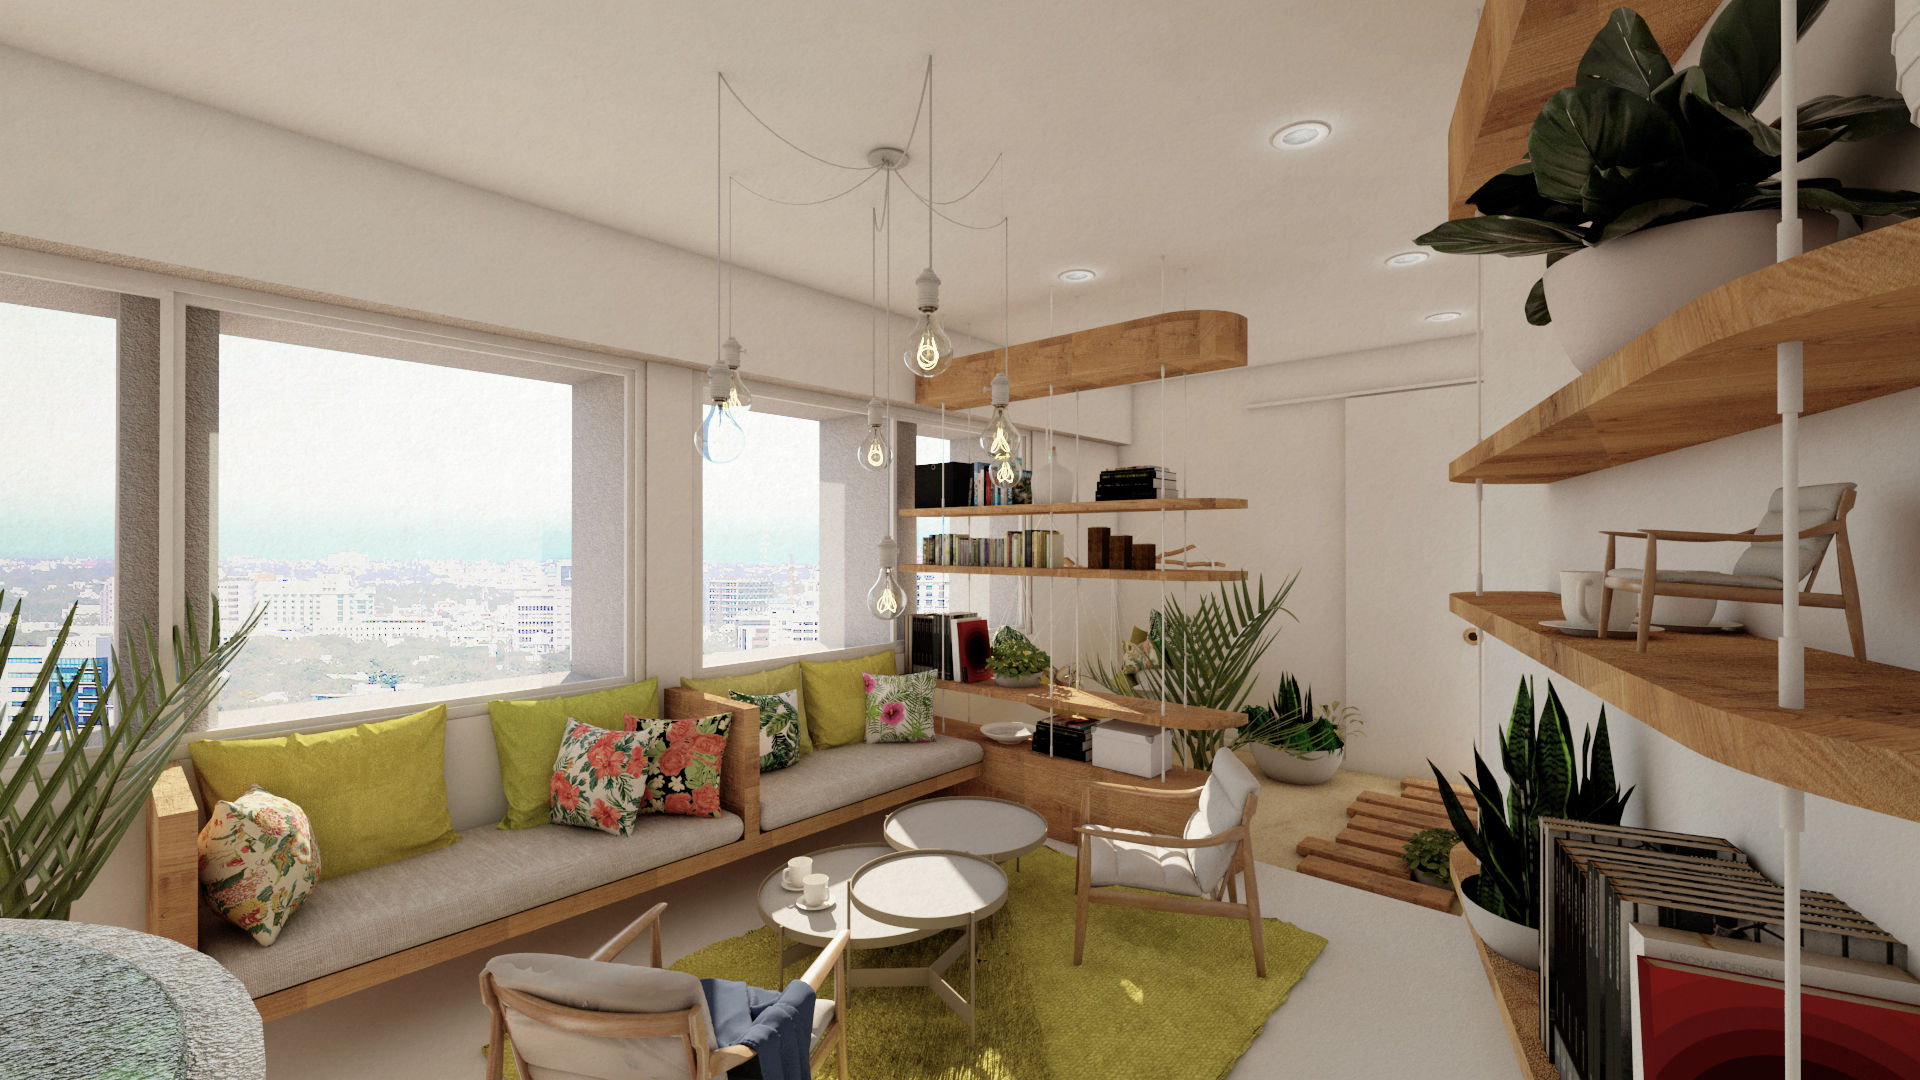 The First - Interior Spaces for Mental Health, Input-A Input-A Classic style living room Furniture,Couch,Property,Plant,Table,Houseplant,Wood,Interior design,Building,Architecture